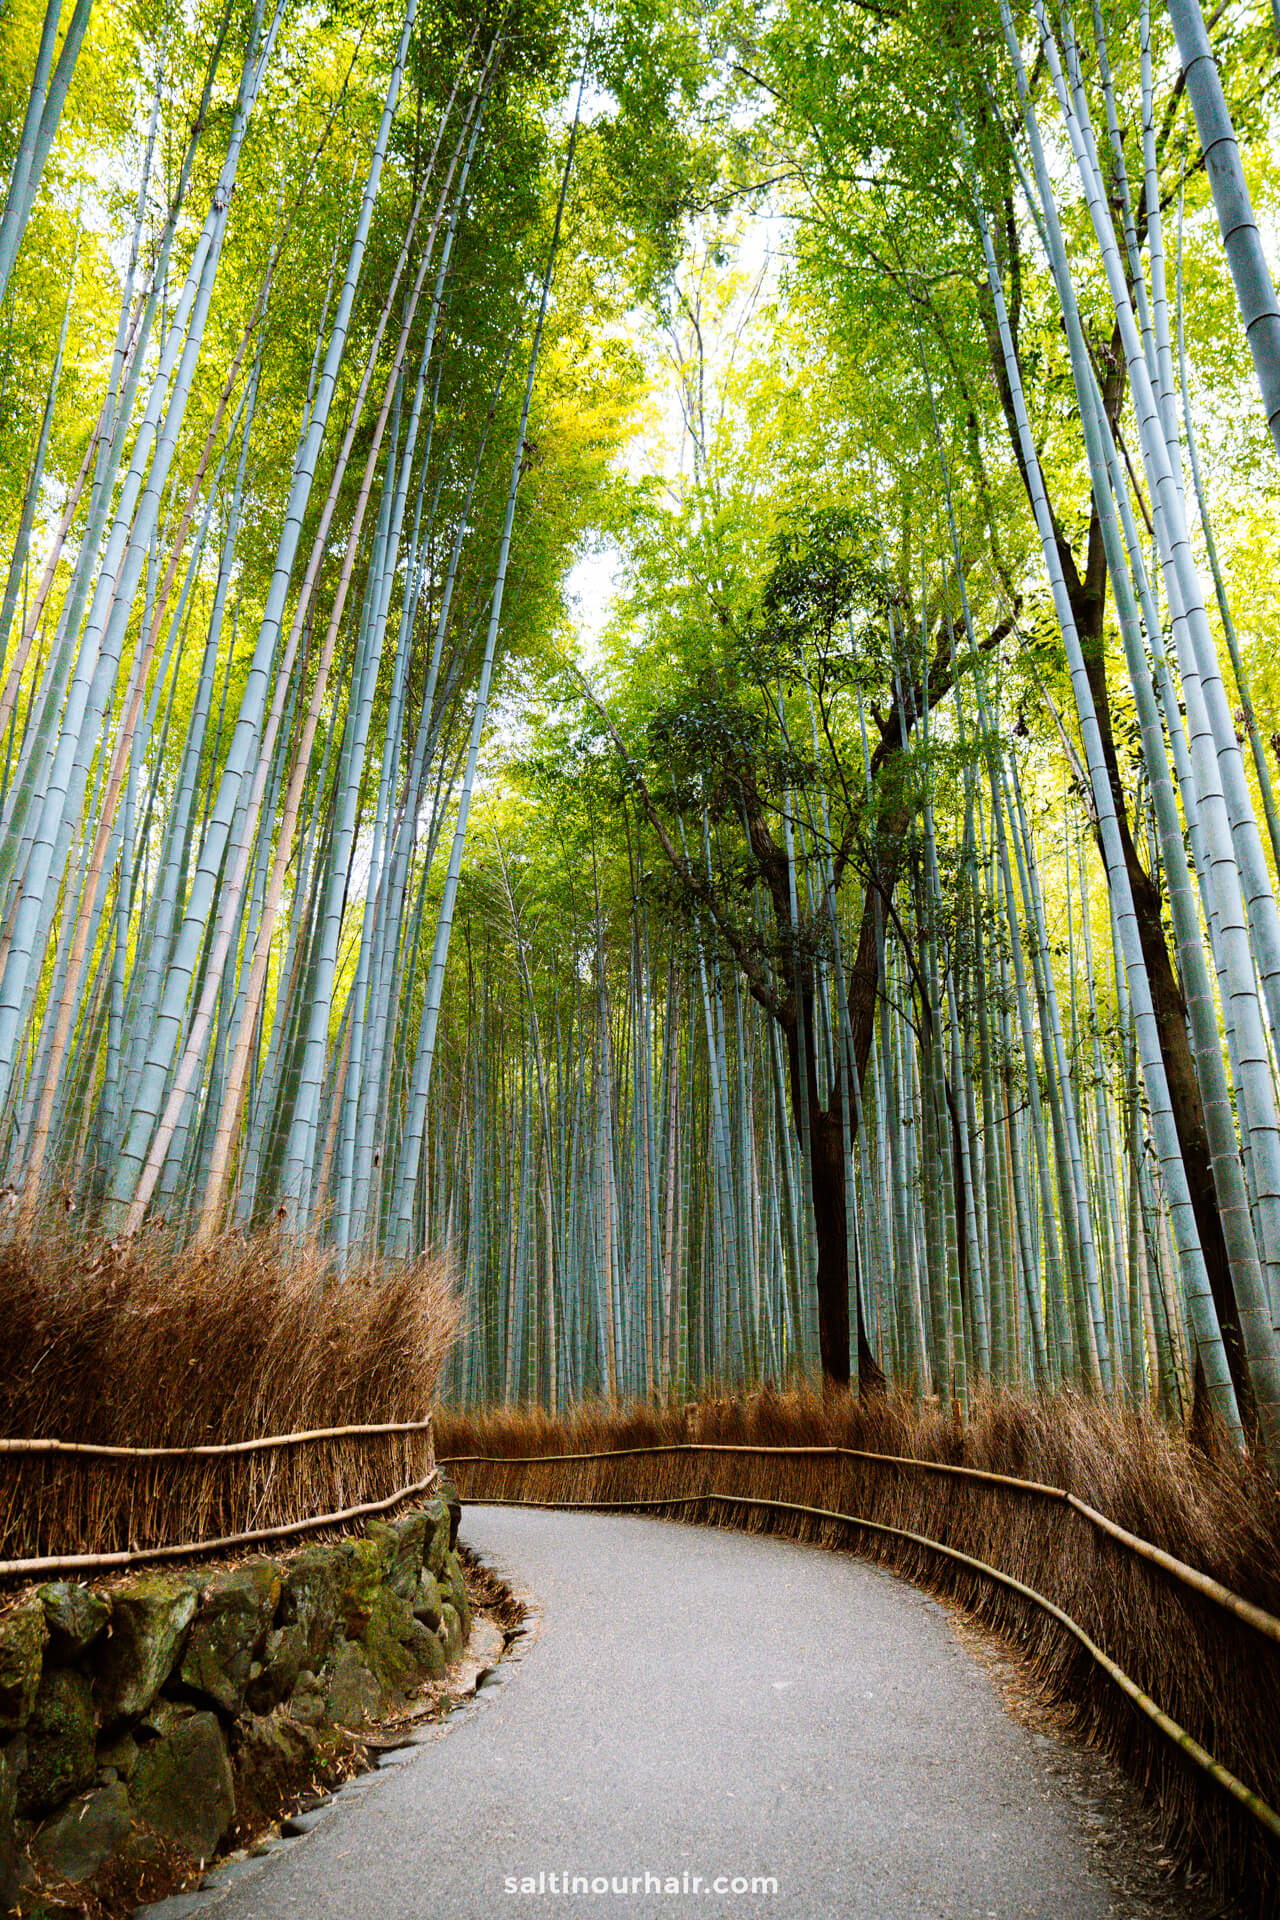 bamboo forest kyoto japan